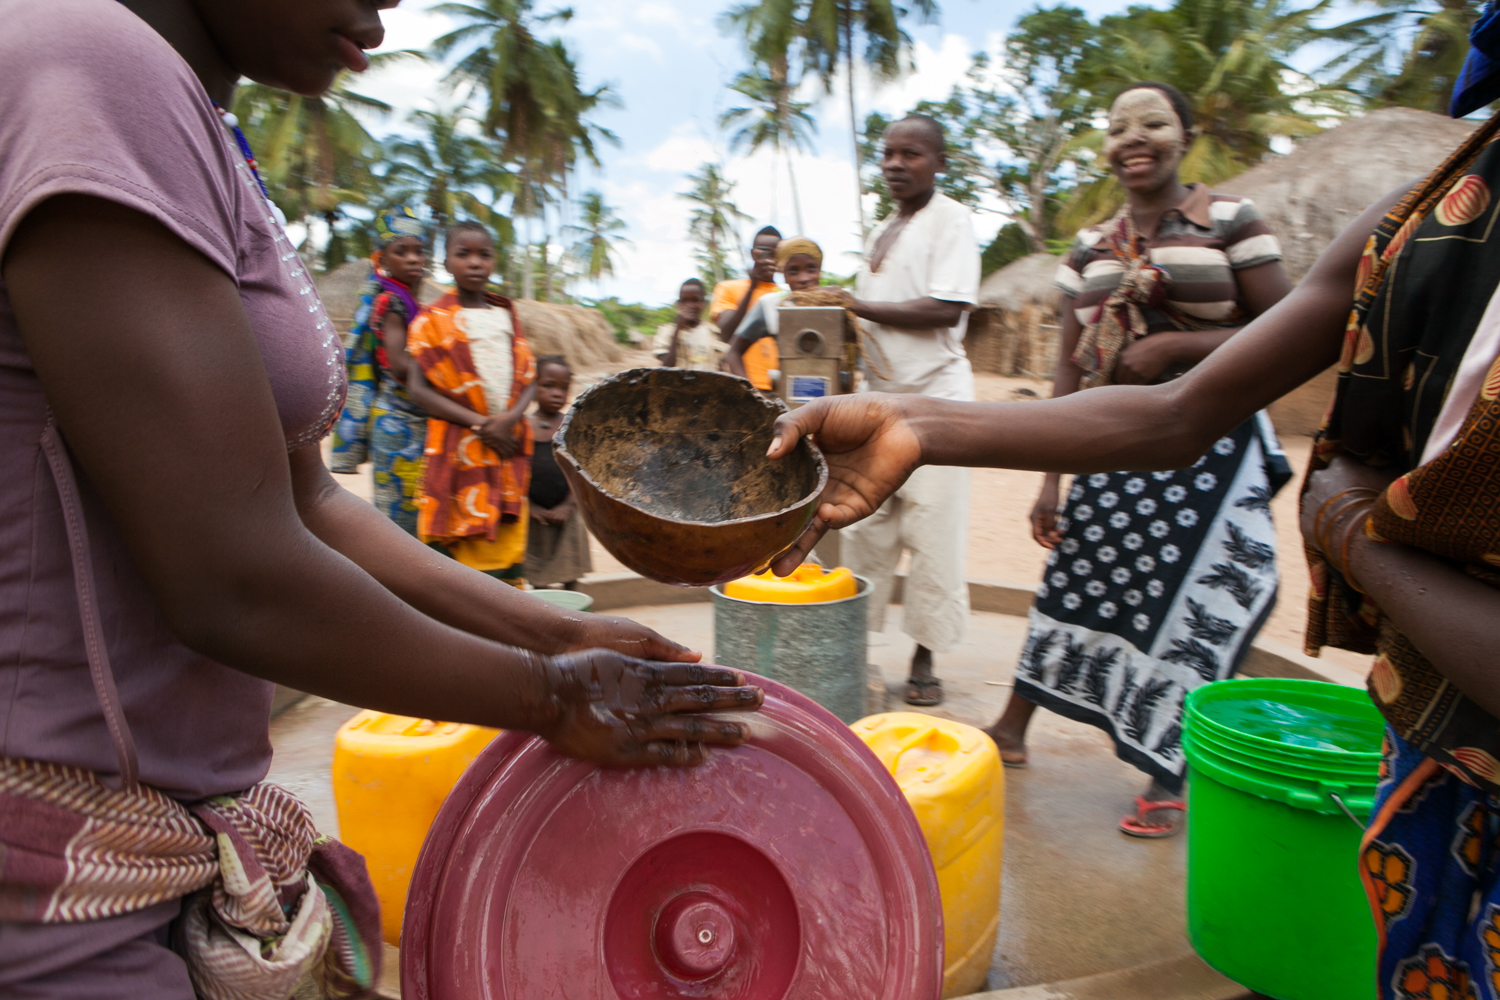  After pump repairs are complete, residents bring their colorful buckets and collect water. They oftentimes utilize a coconut shell for distributing water between buckets and washing their hands. 